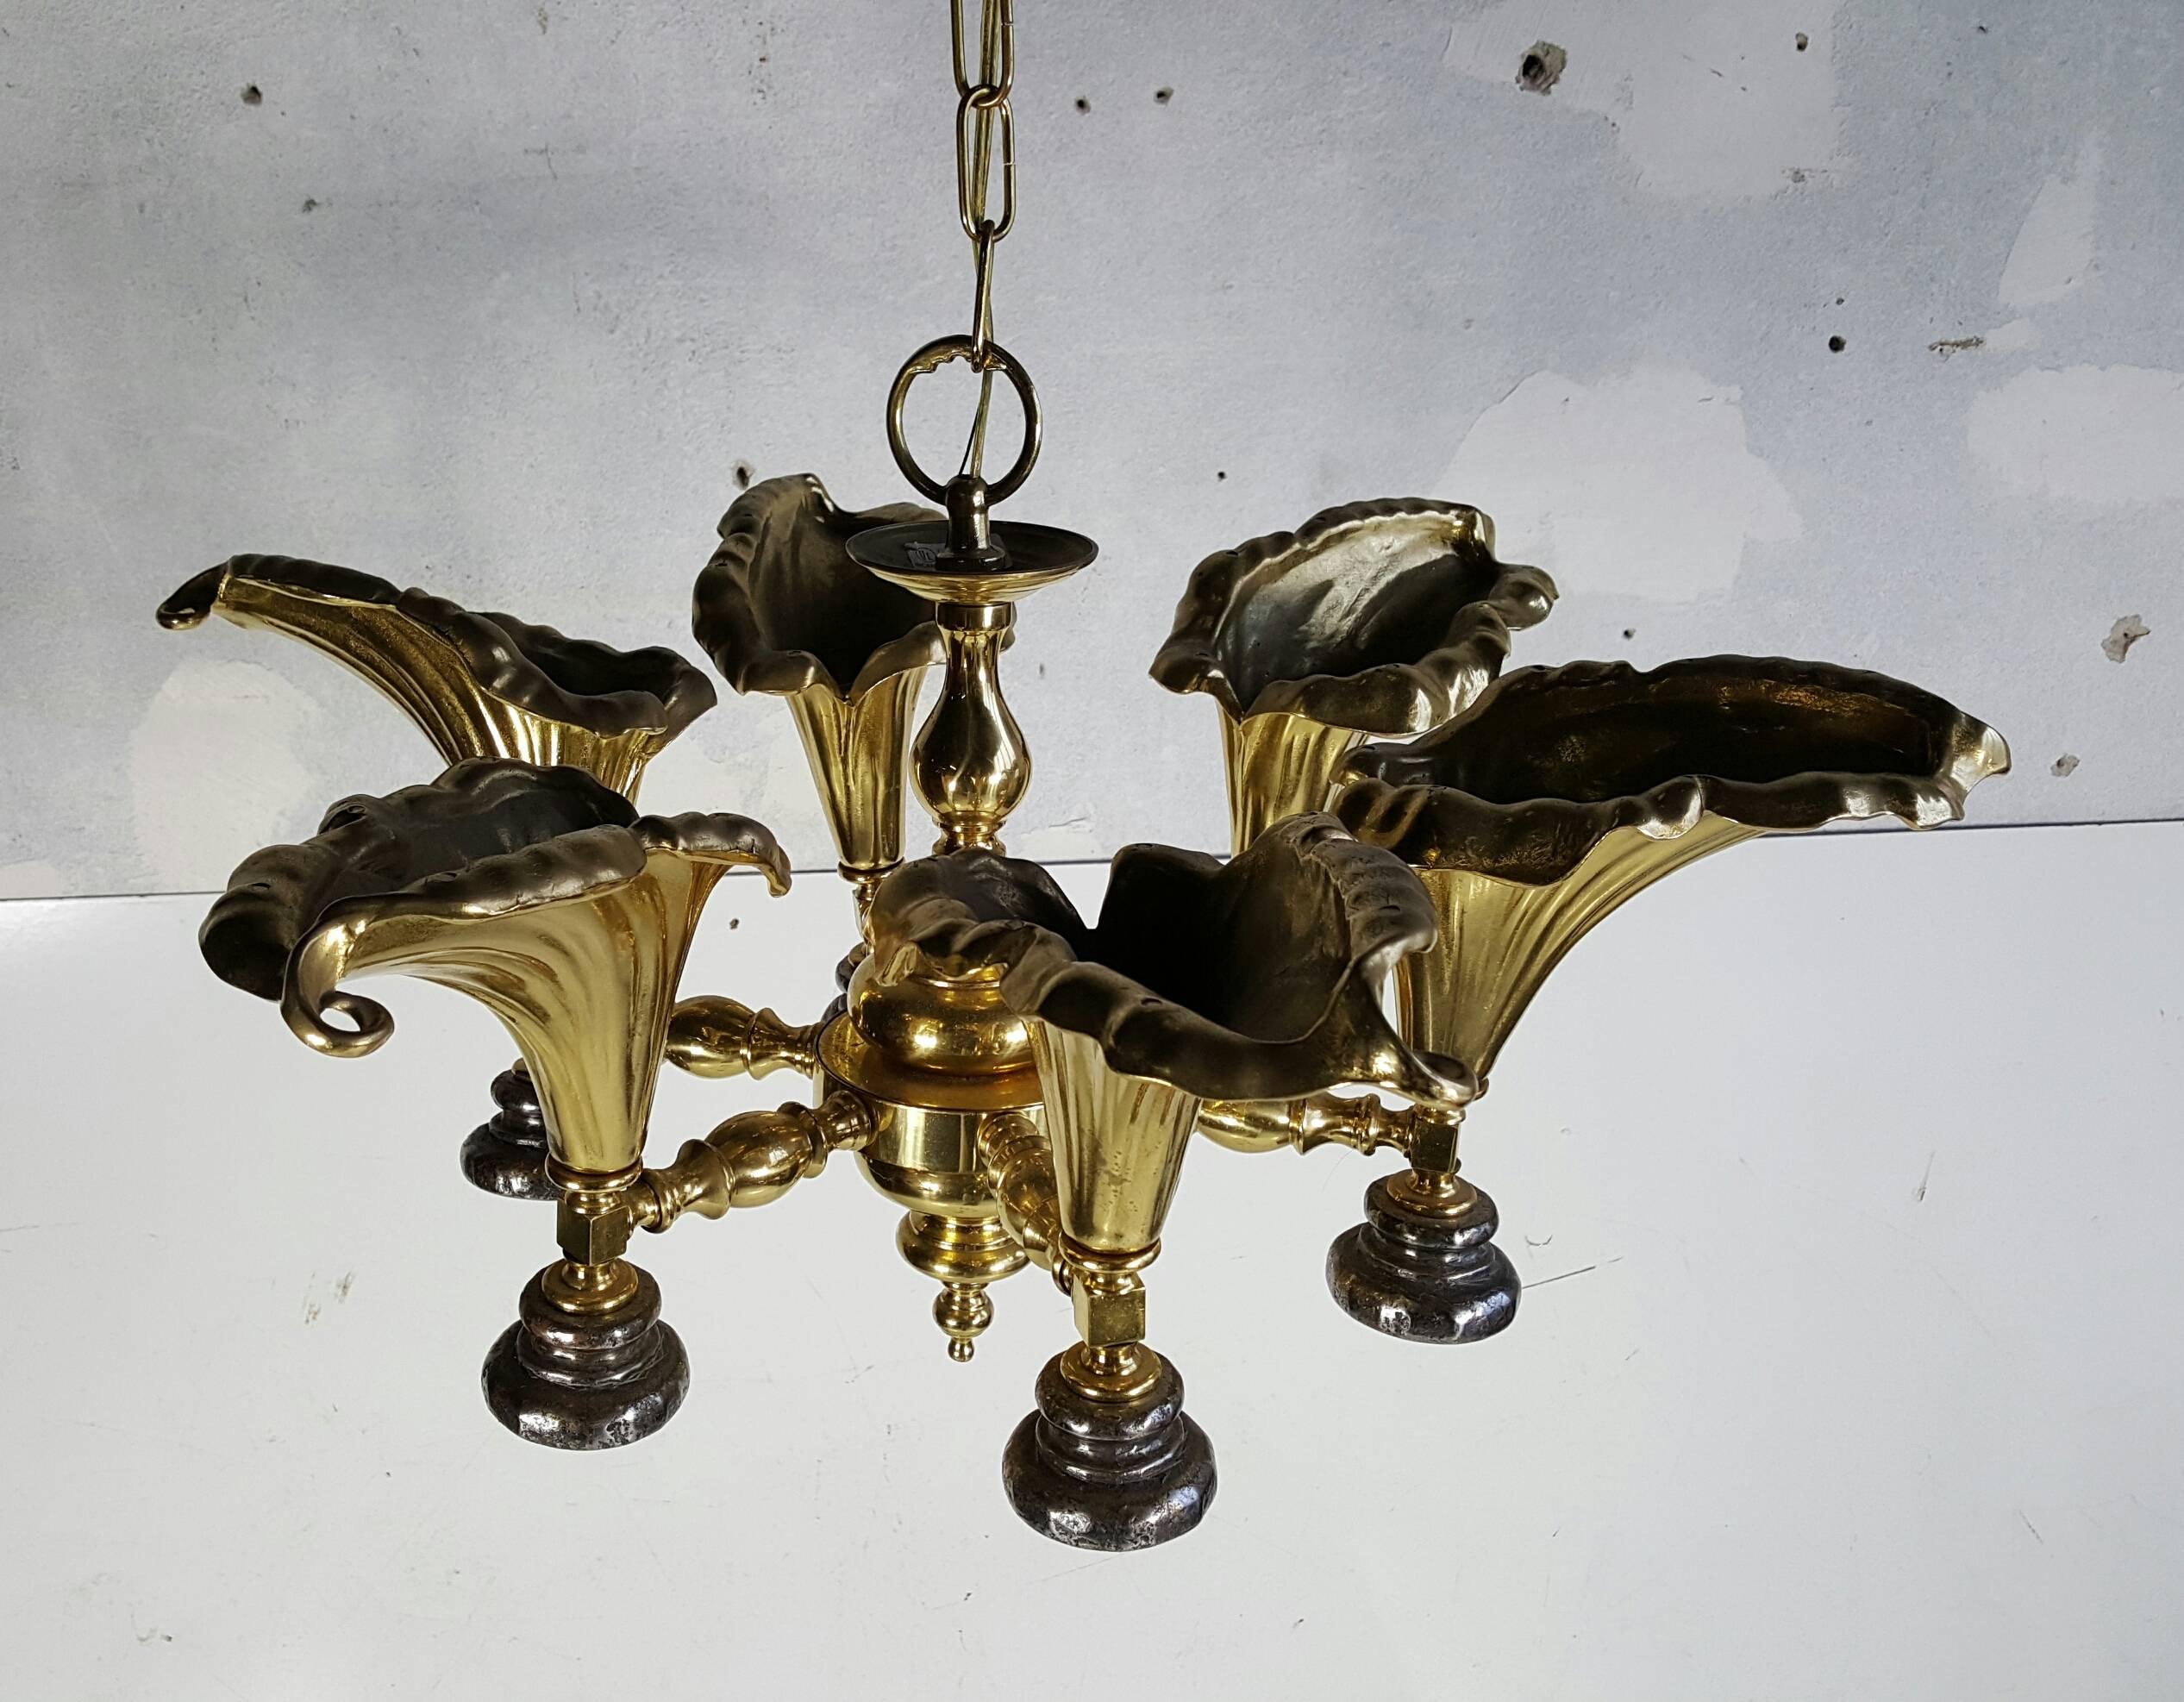 Wonderful Cast Brass hanging light fixture,,Supreme quality,featuring 6 large calla lily up sconces,flowers measure 8